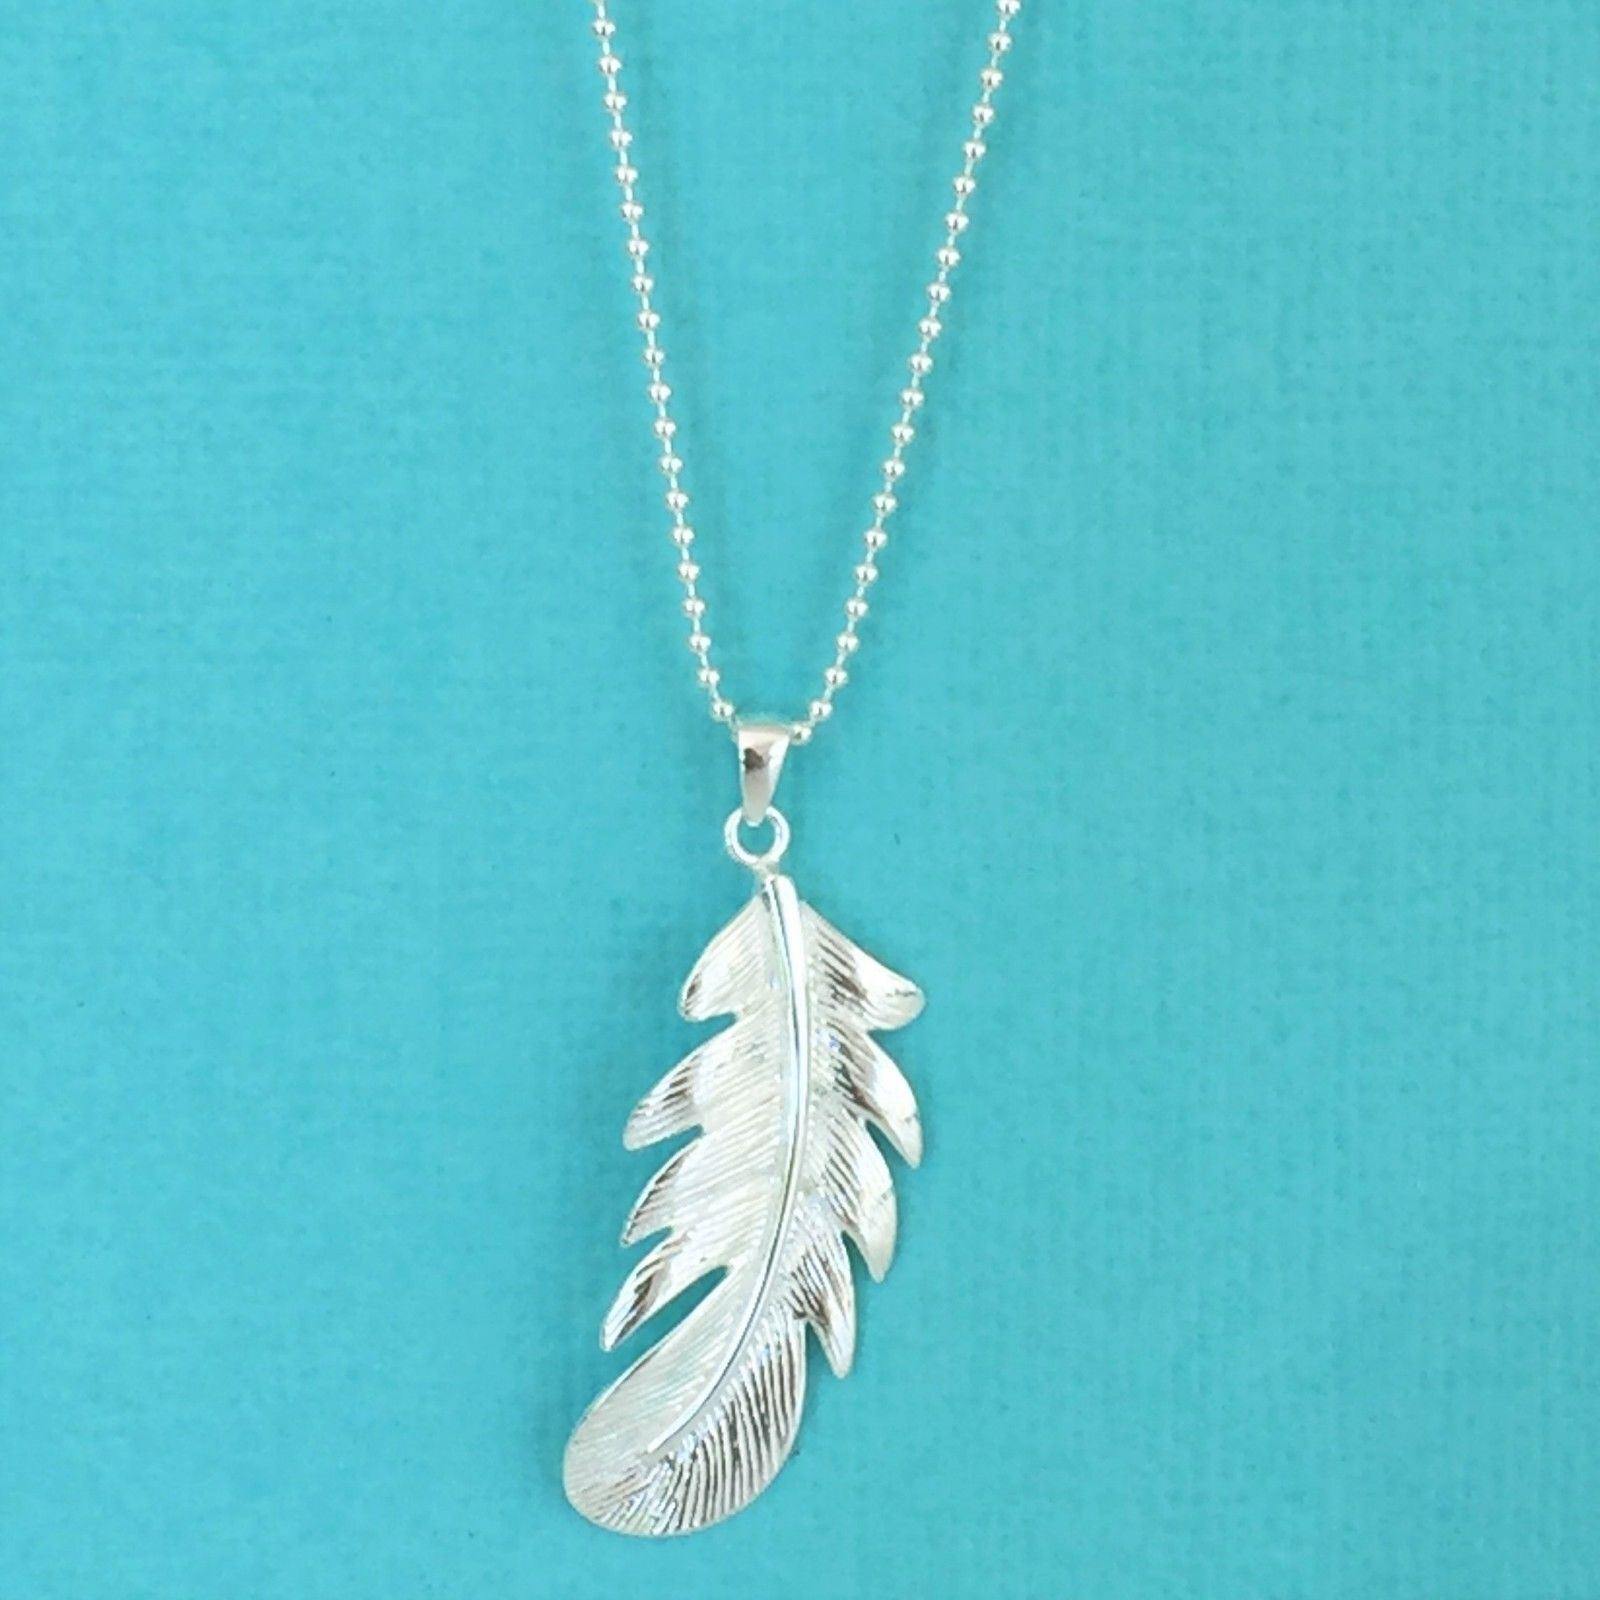 Sterling Silver 925 Single Feather Pendant (13 x 37) & 60cm Ball Chain Necklace - STERLING SILVER DESIGNS